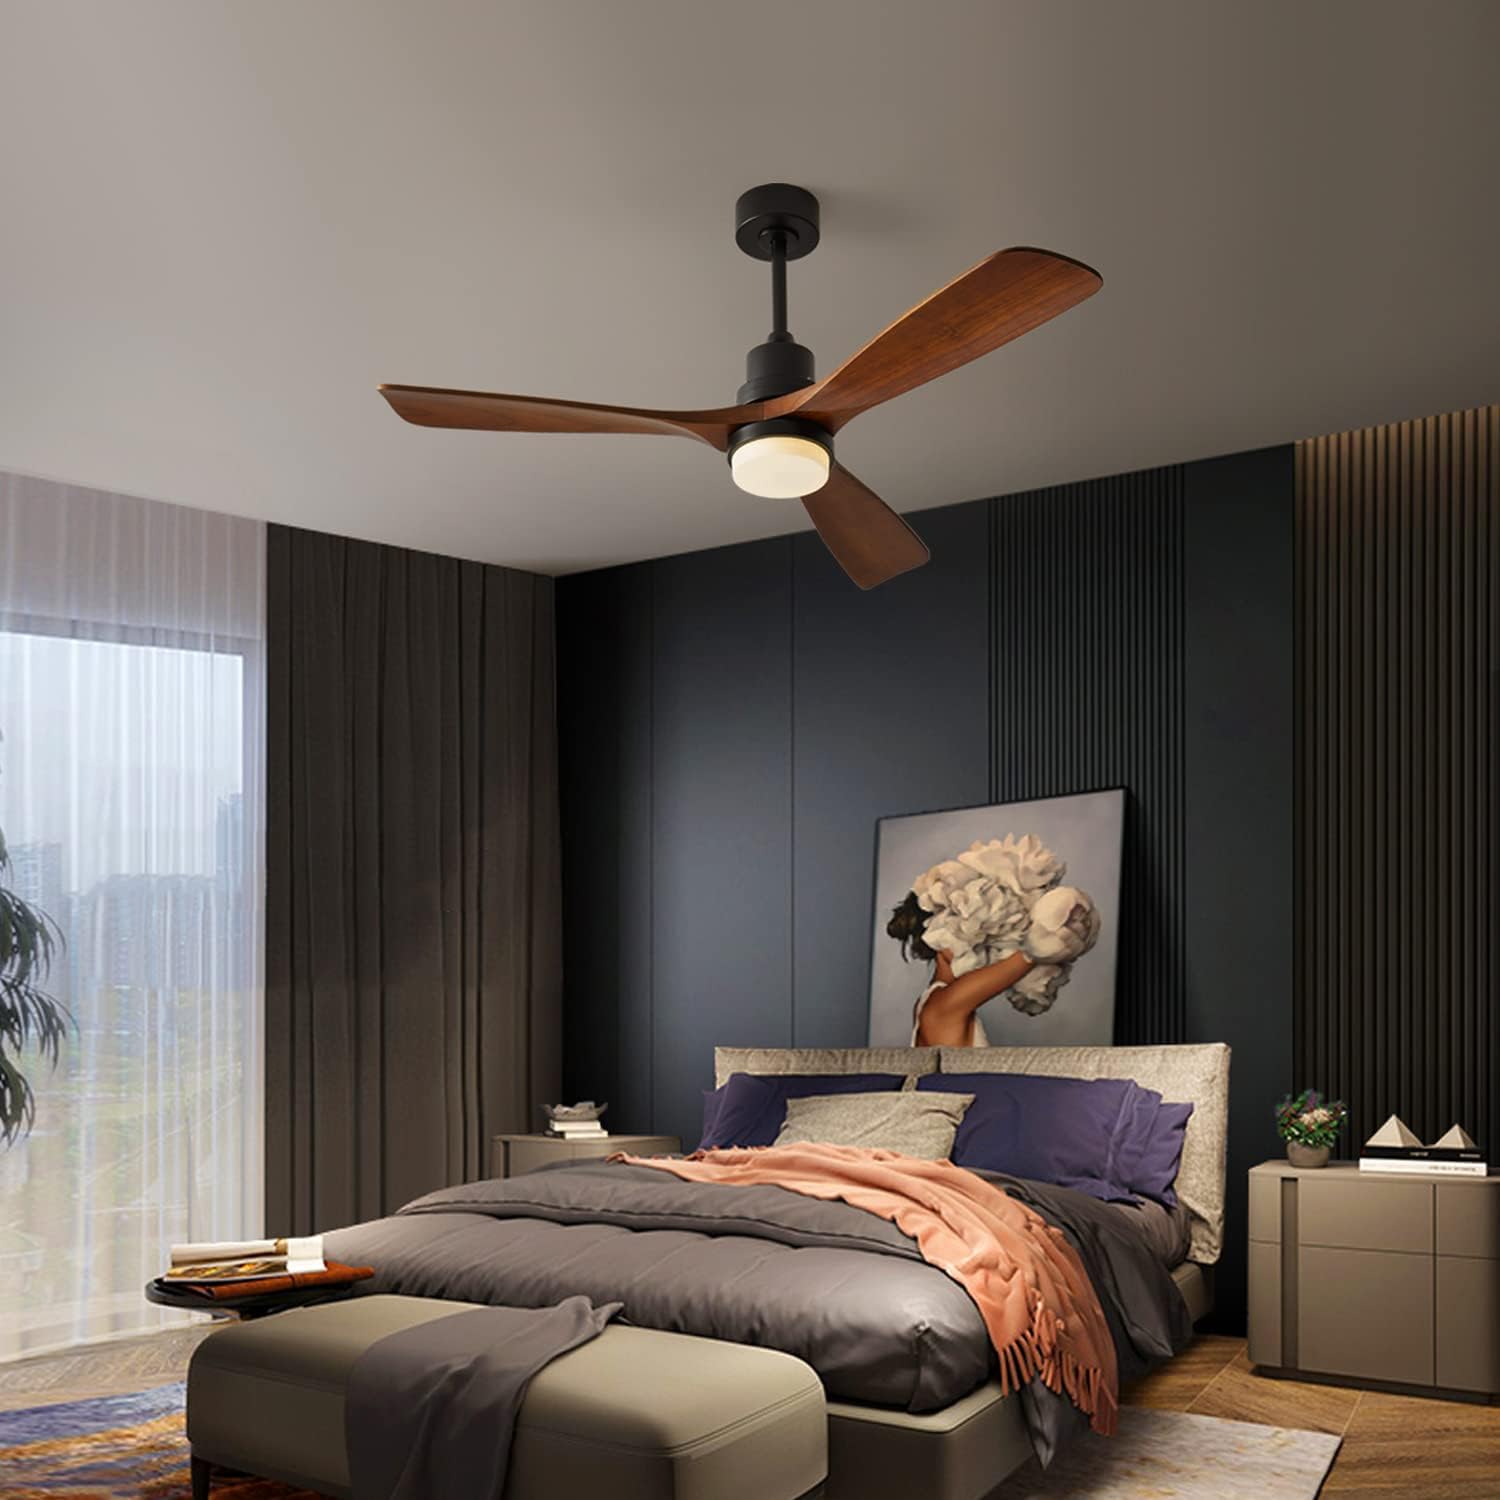 Modern Ceiling Fans with Lights, 3 Wood Fan Blades, 52 Black with Remote Control, Noiseless Reversible DC Motor for Bedroom/Living Room/Study/Patio